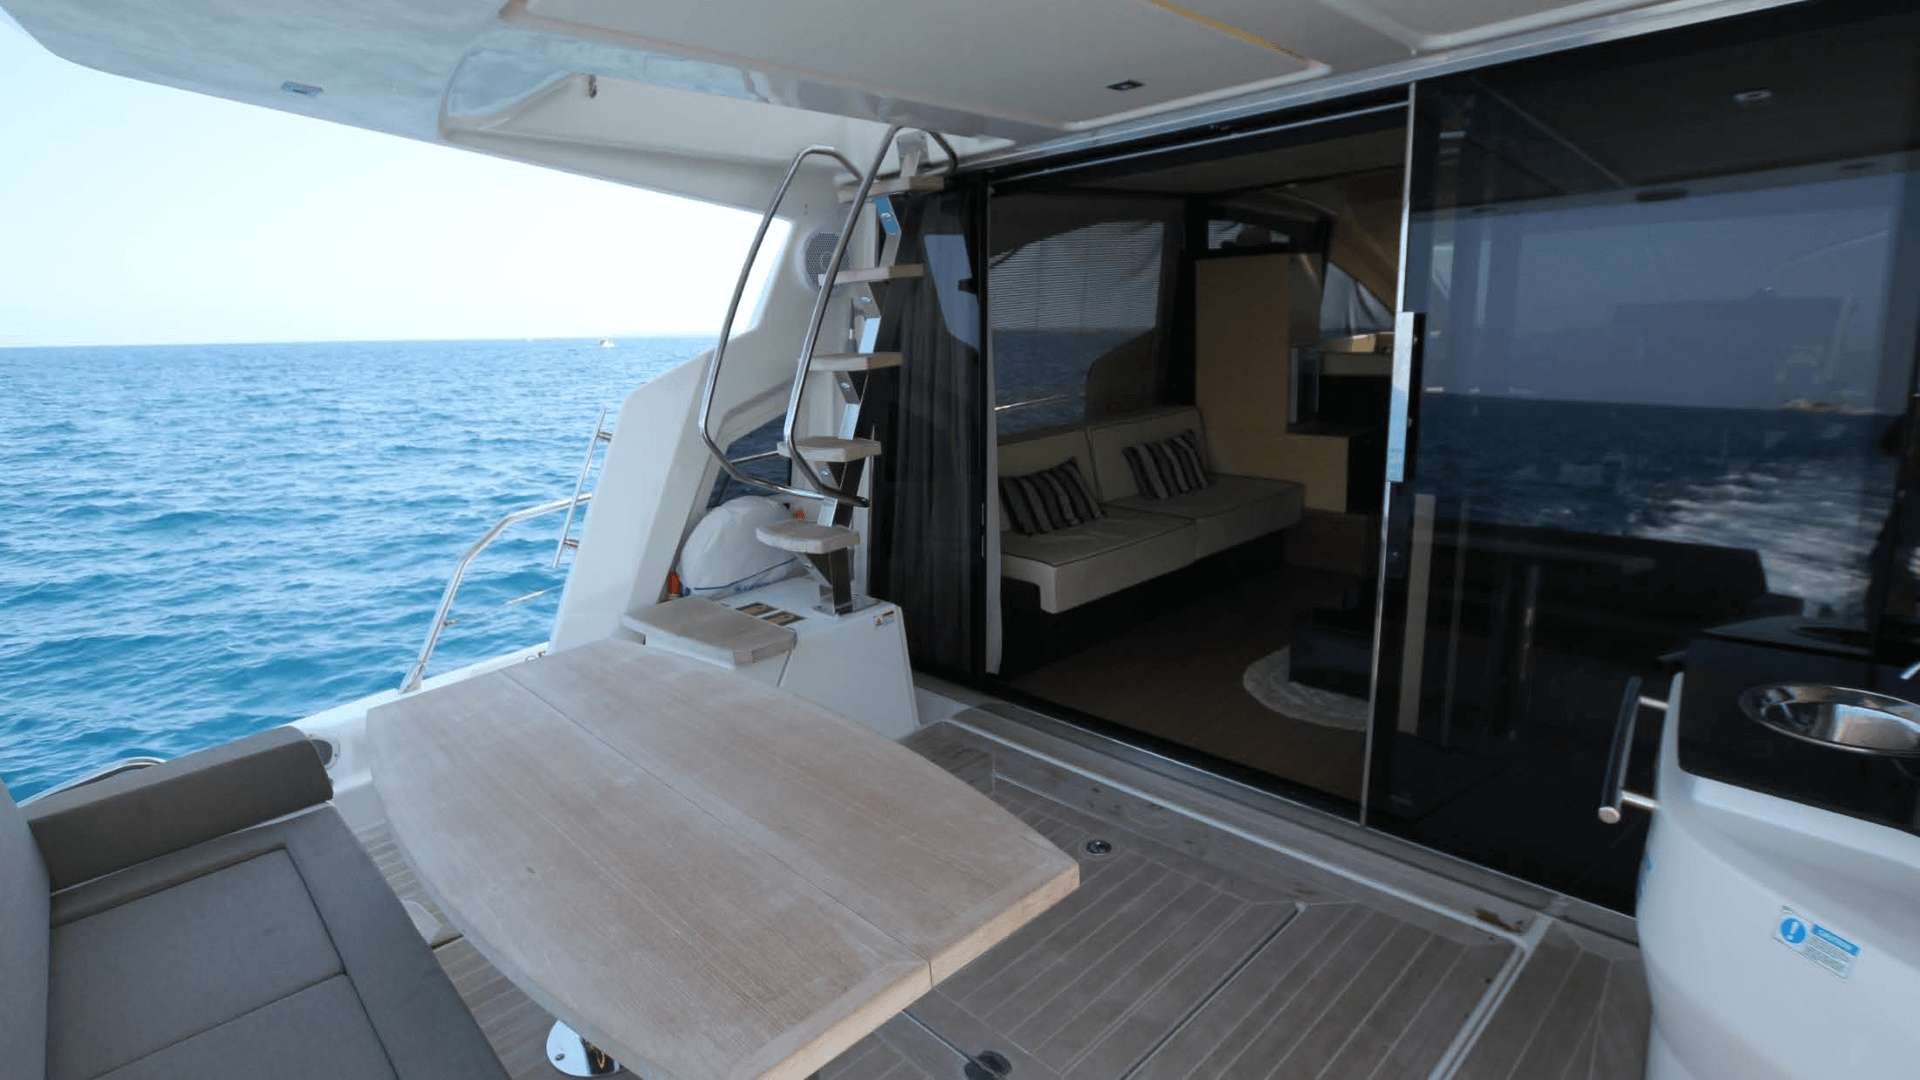 Cranchi 58 - Yacht Charter Cyprus & Boat hire in Cyprus Limassol Port of Limassol 4